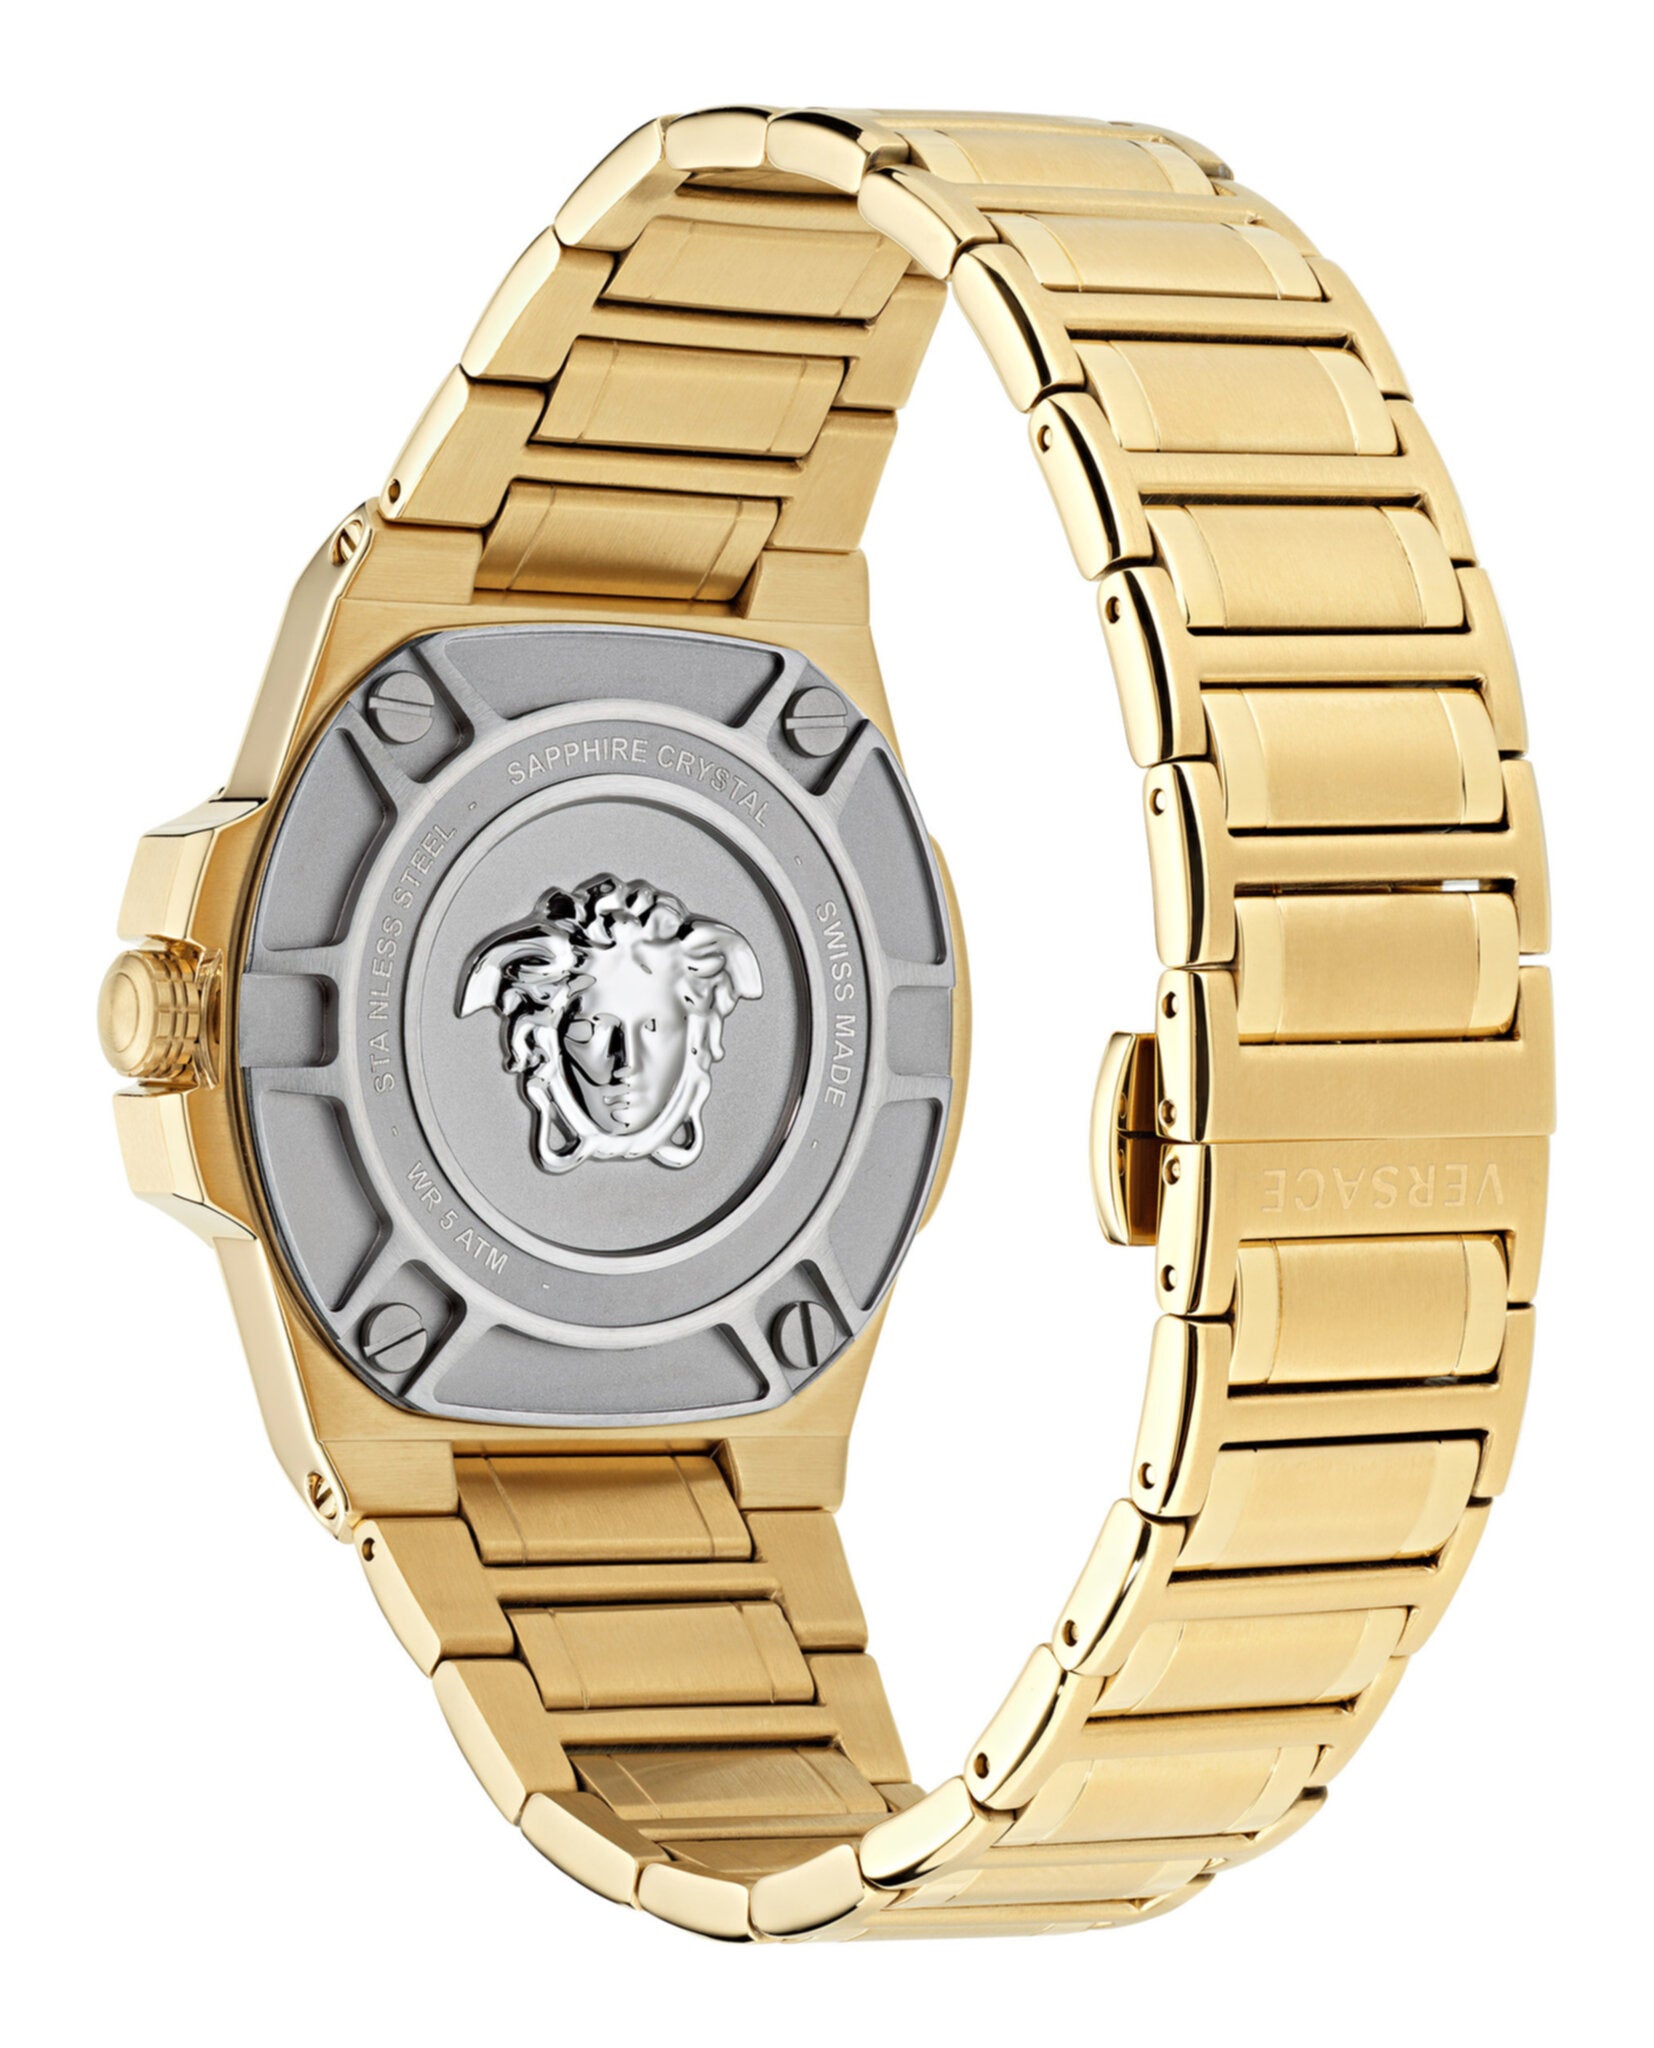 Versace Mens Greca Reaction Watches | MadaLuxe Time – Madaluxe Time